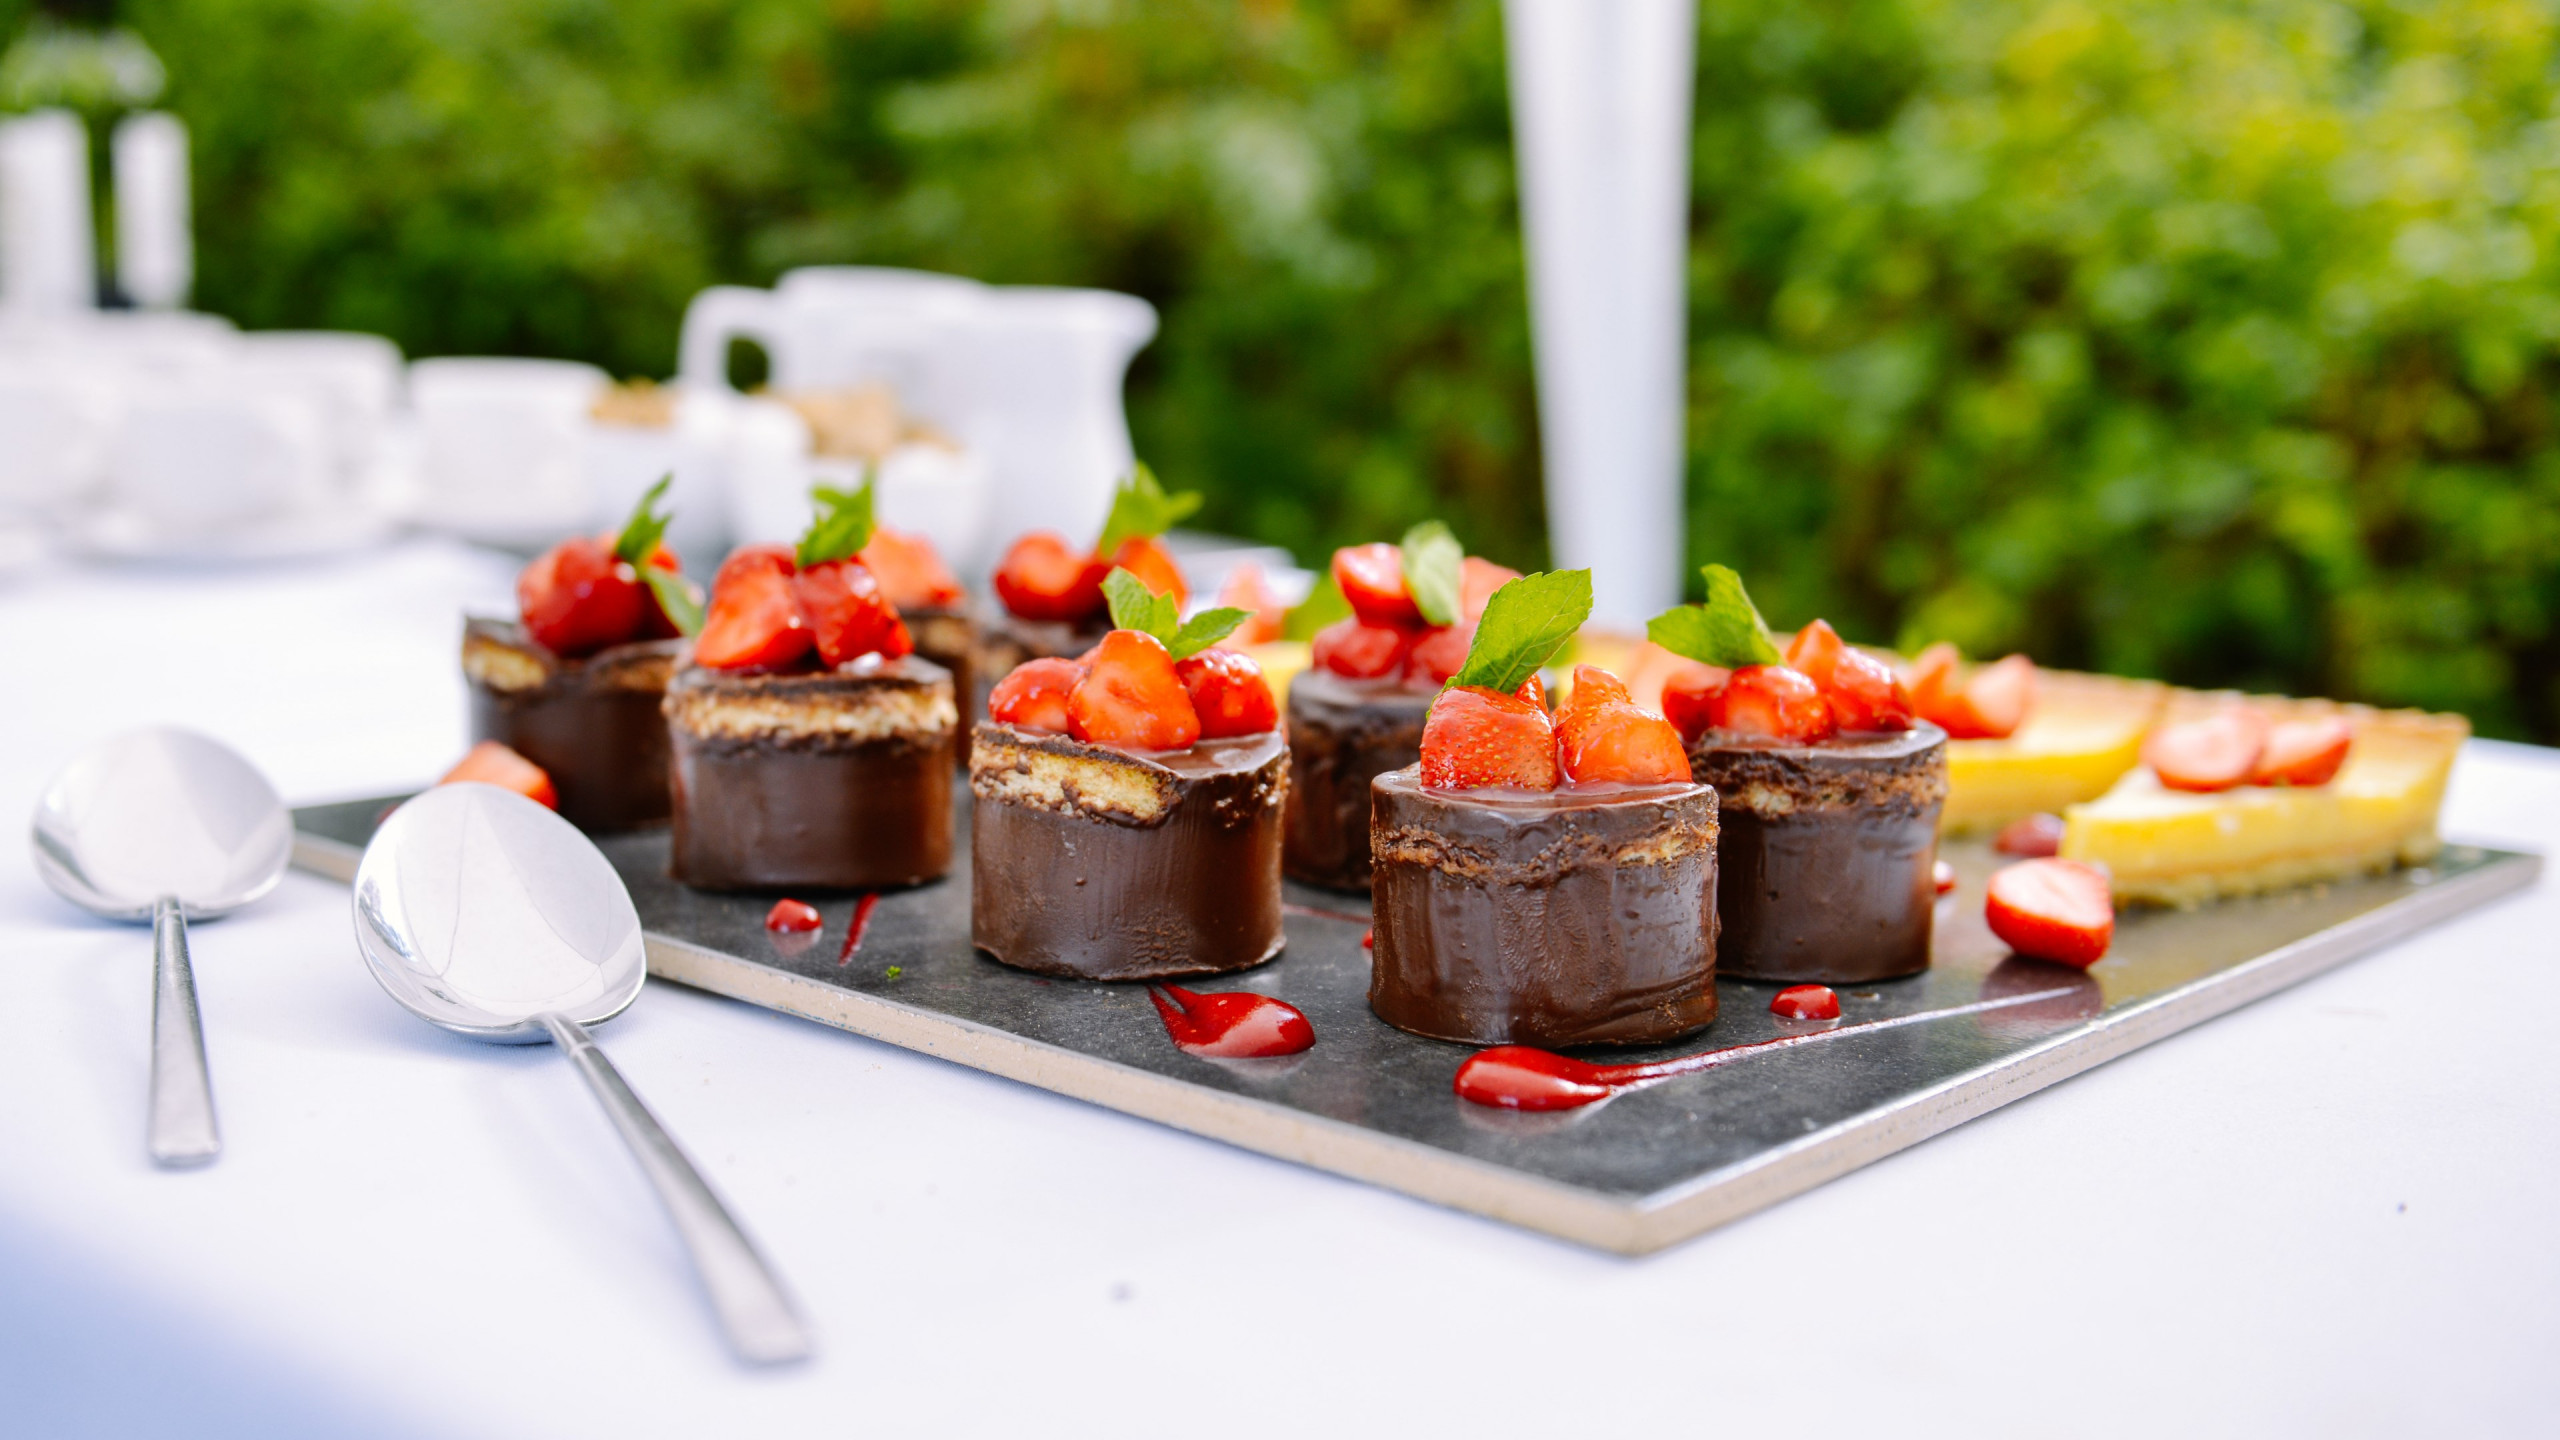 Chocolate cakes with strawberries wallpaper 2560x1440